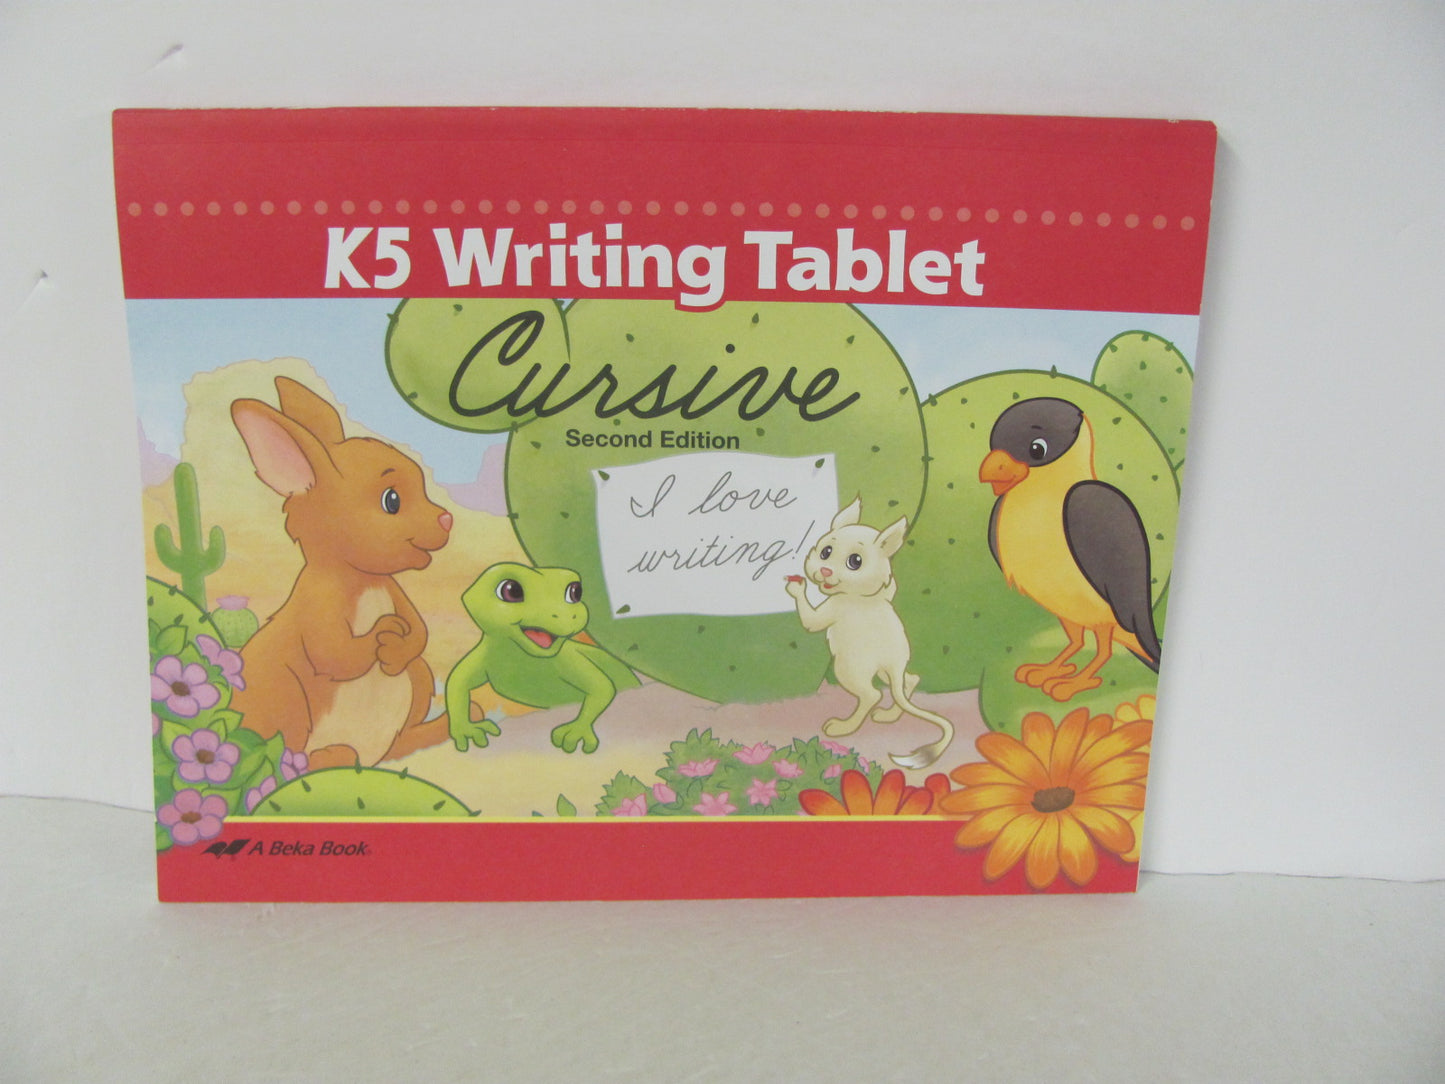 K5 Writing Tablet Cursive Abeka Student Book Pre-Owned Language Textbooks